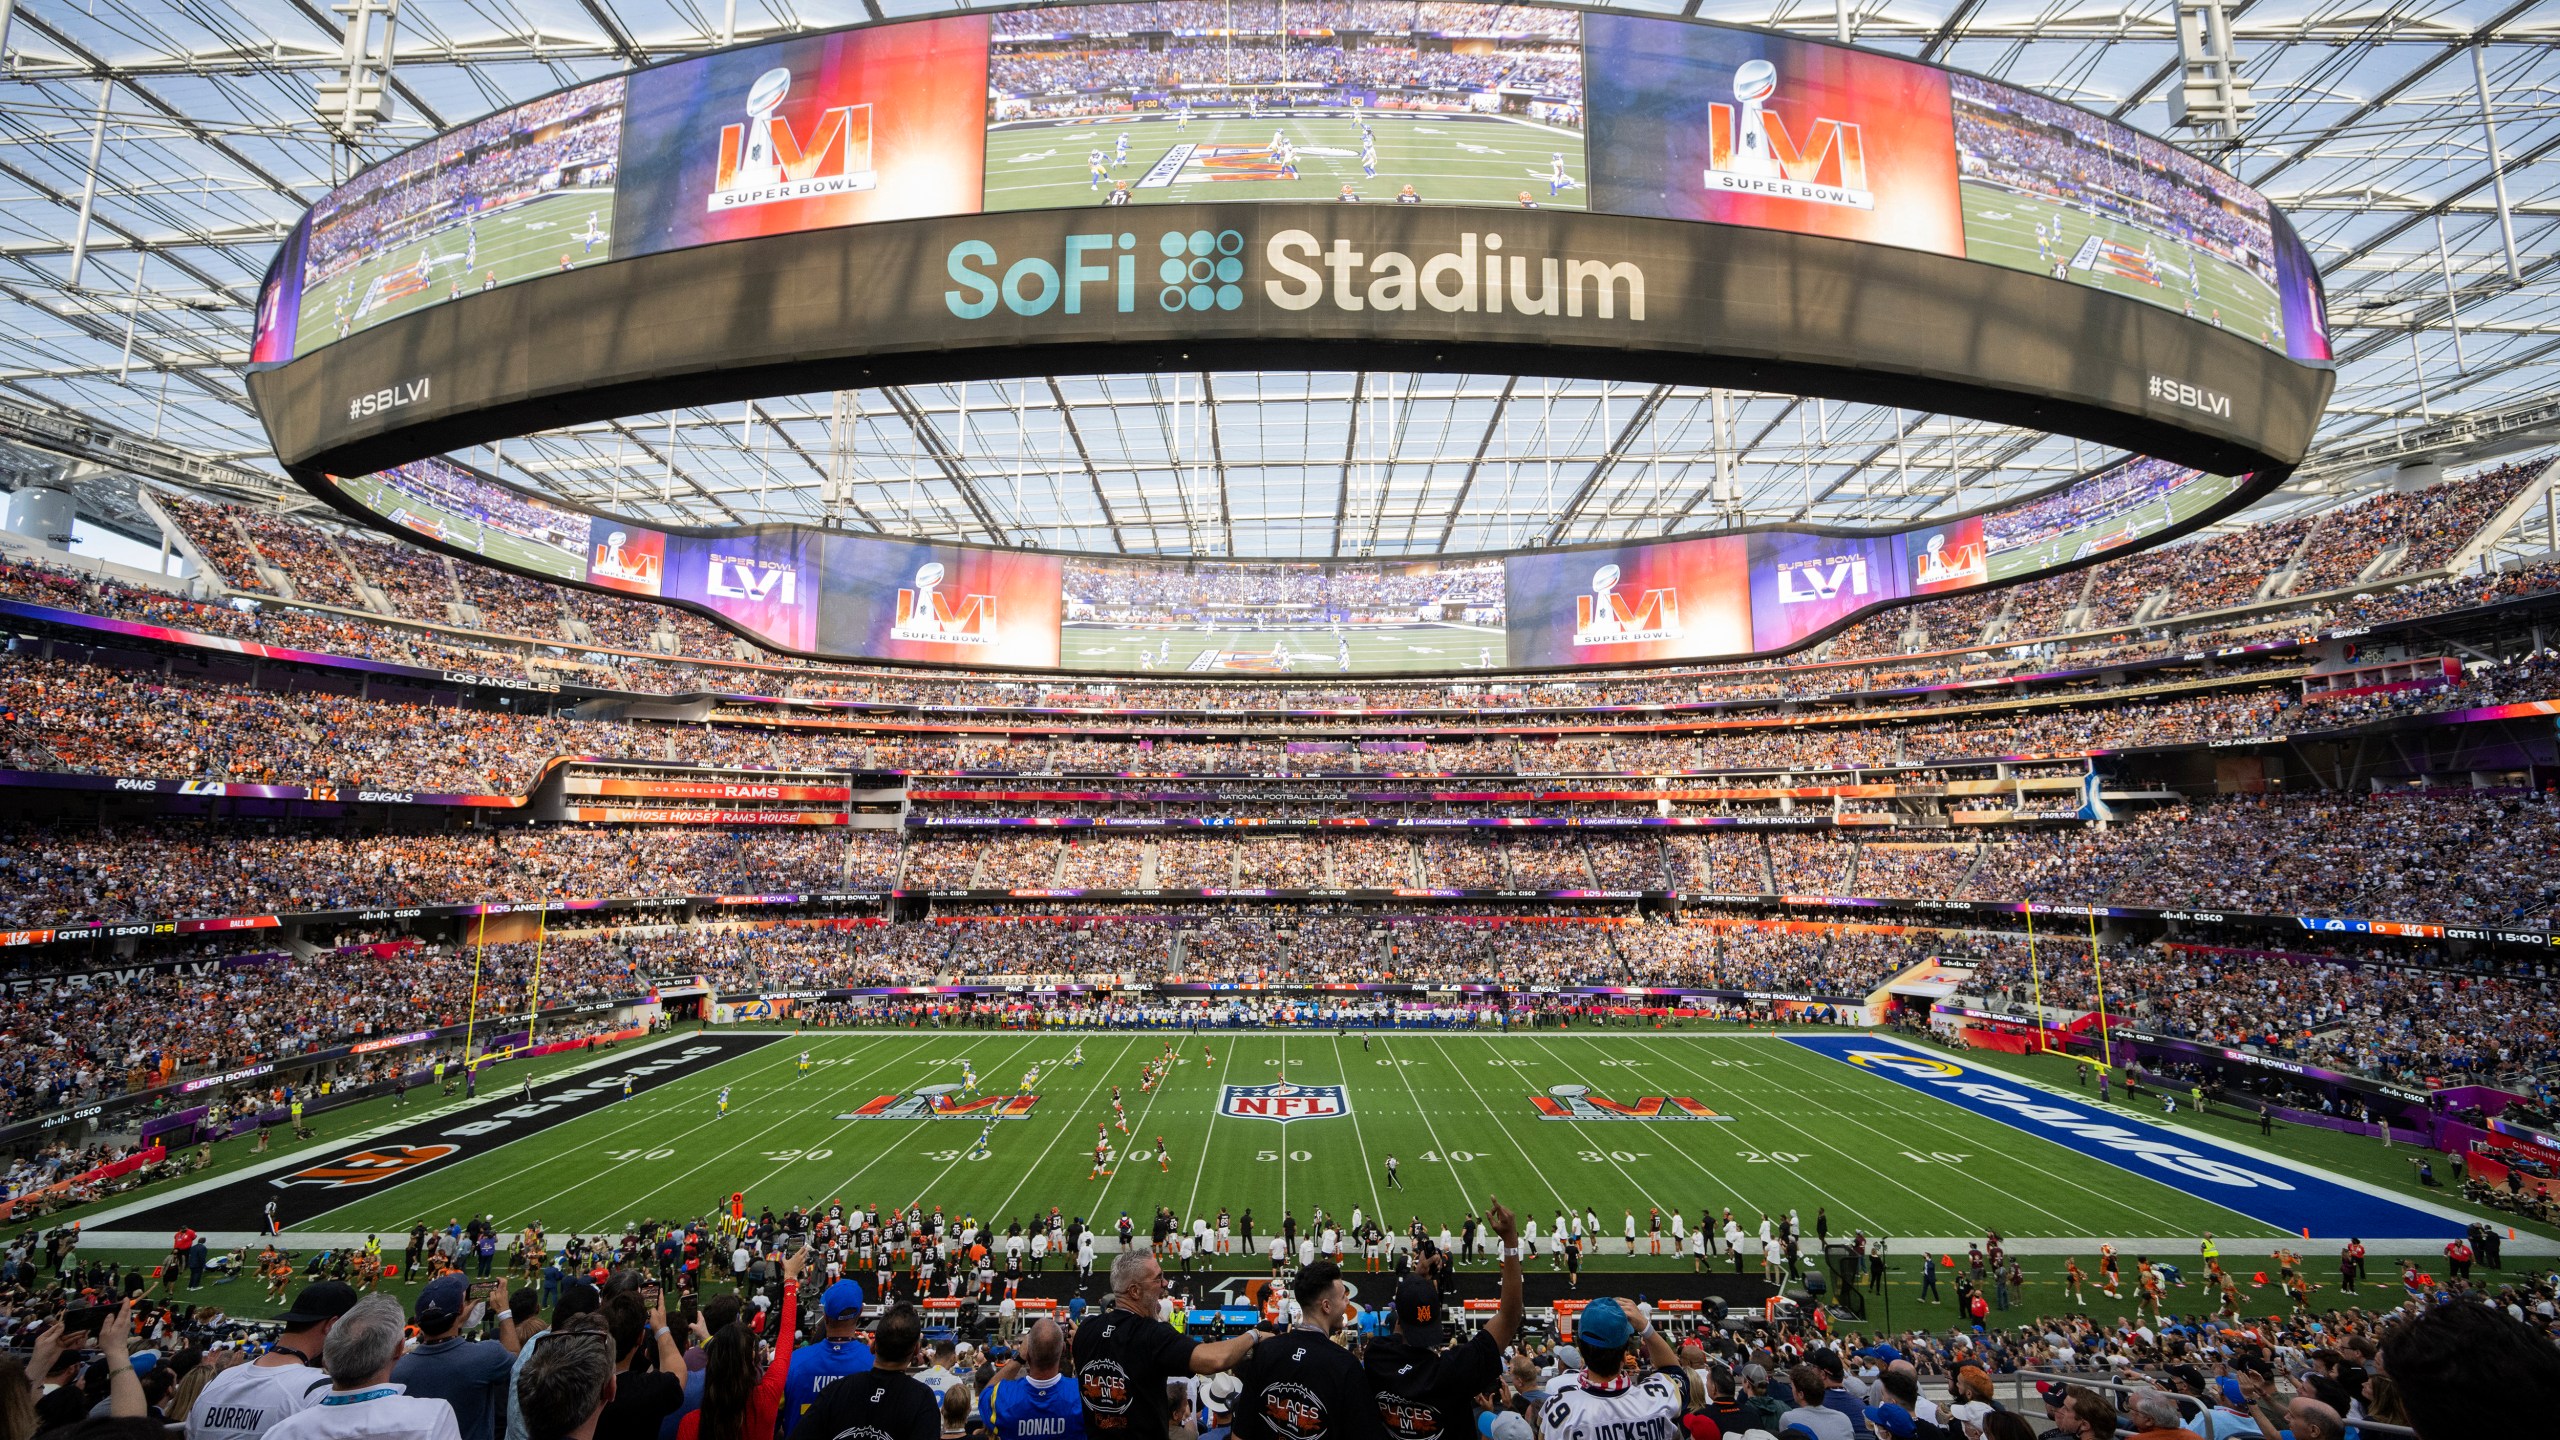 A general view of the interior of SoFi Stadium is seen during Super Bowl 56 on Sunday, Feb. 13, 2022, in Inglewood, Calif. (AP Photo/Kyusung Gong, File)